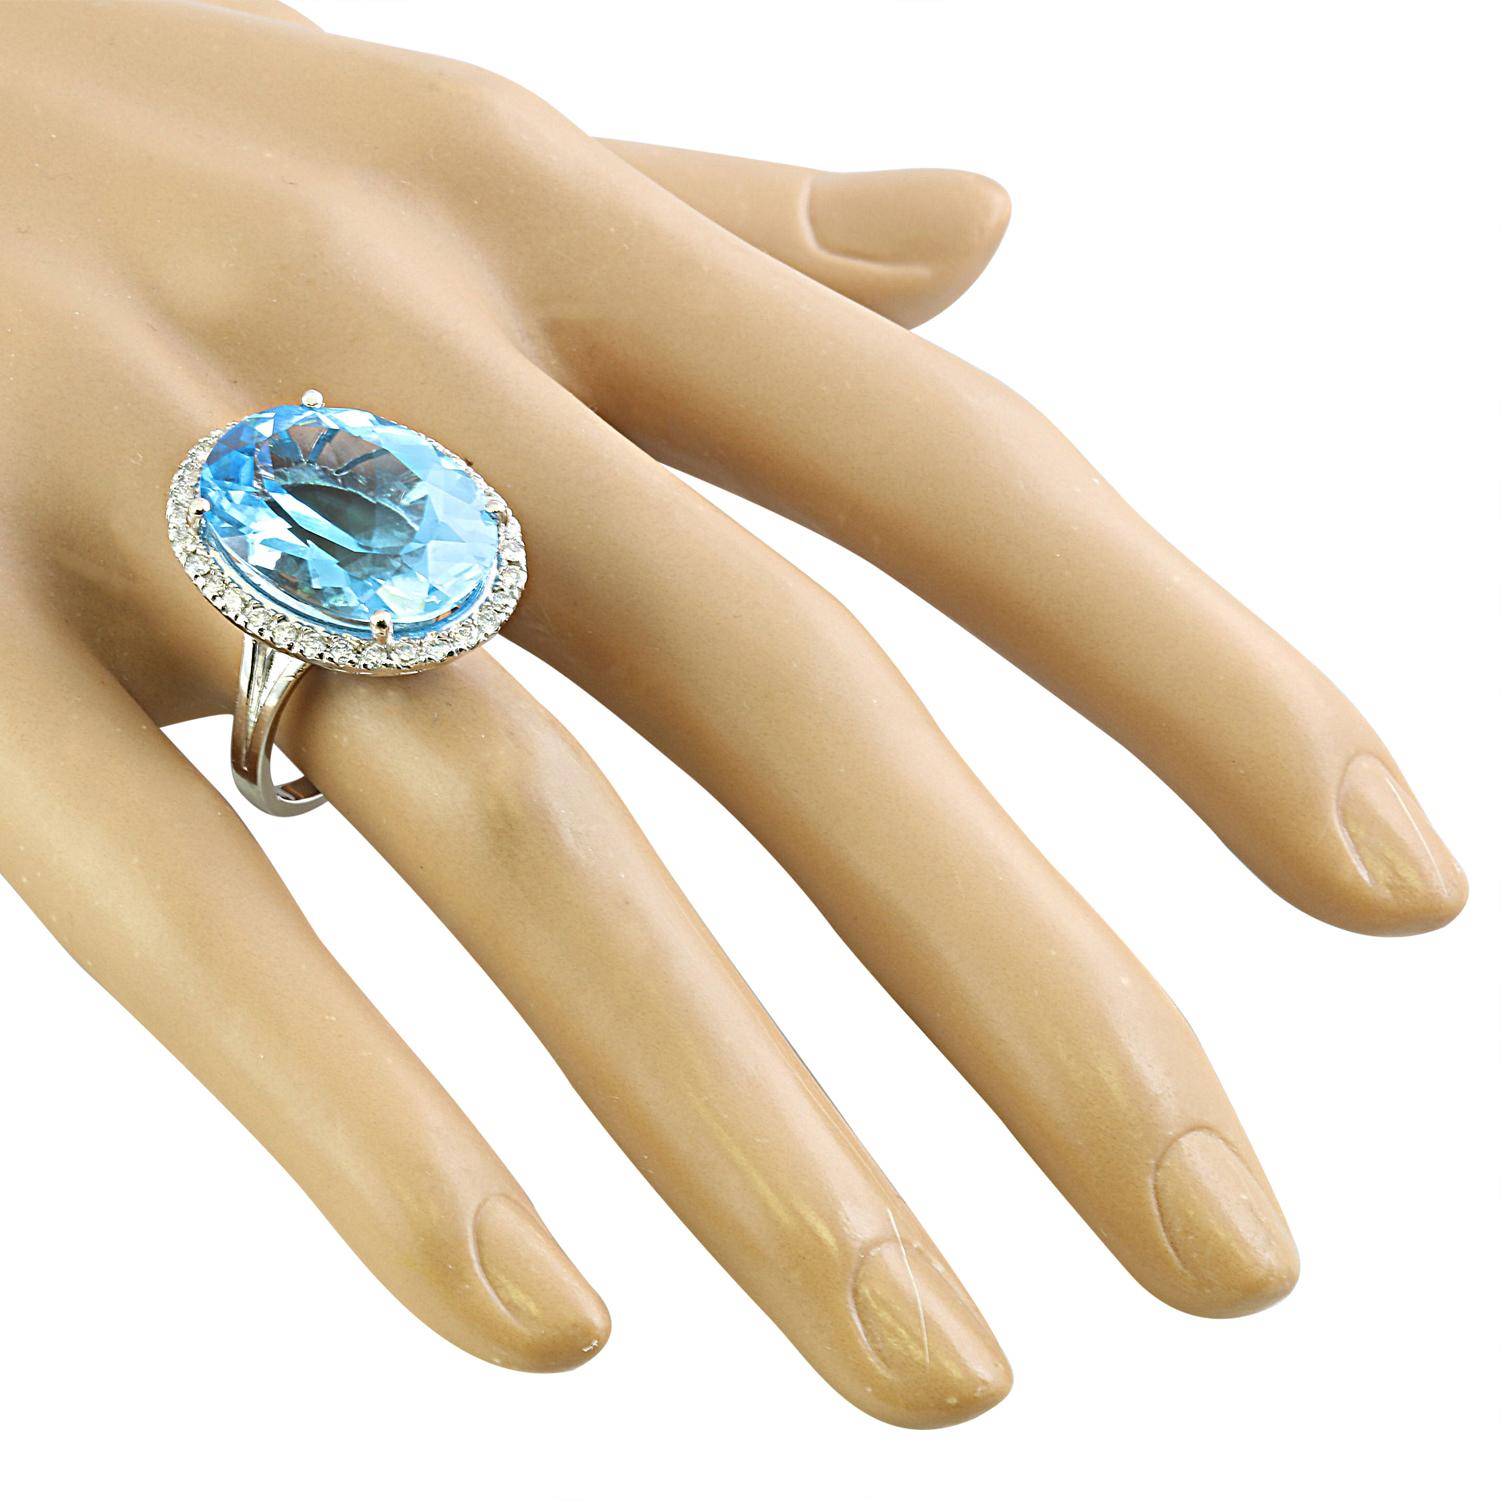 Radiant Blue Sparkle: Swiss Blue Topaz Diamond Ring in 14K Solid White Gold In New Condition For Sale In Manhattan Beach, CA